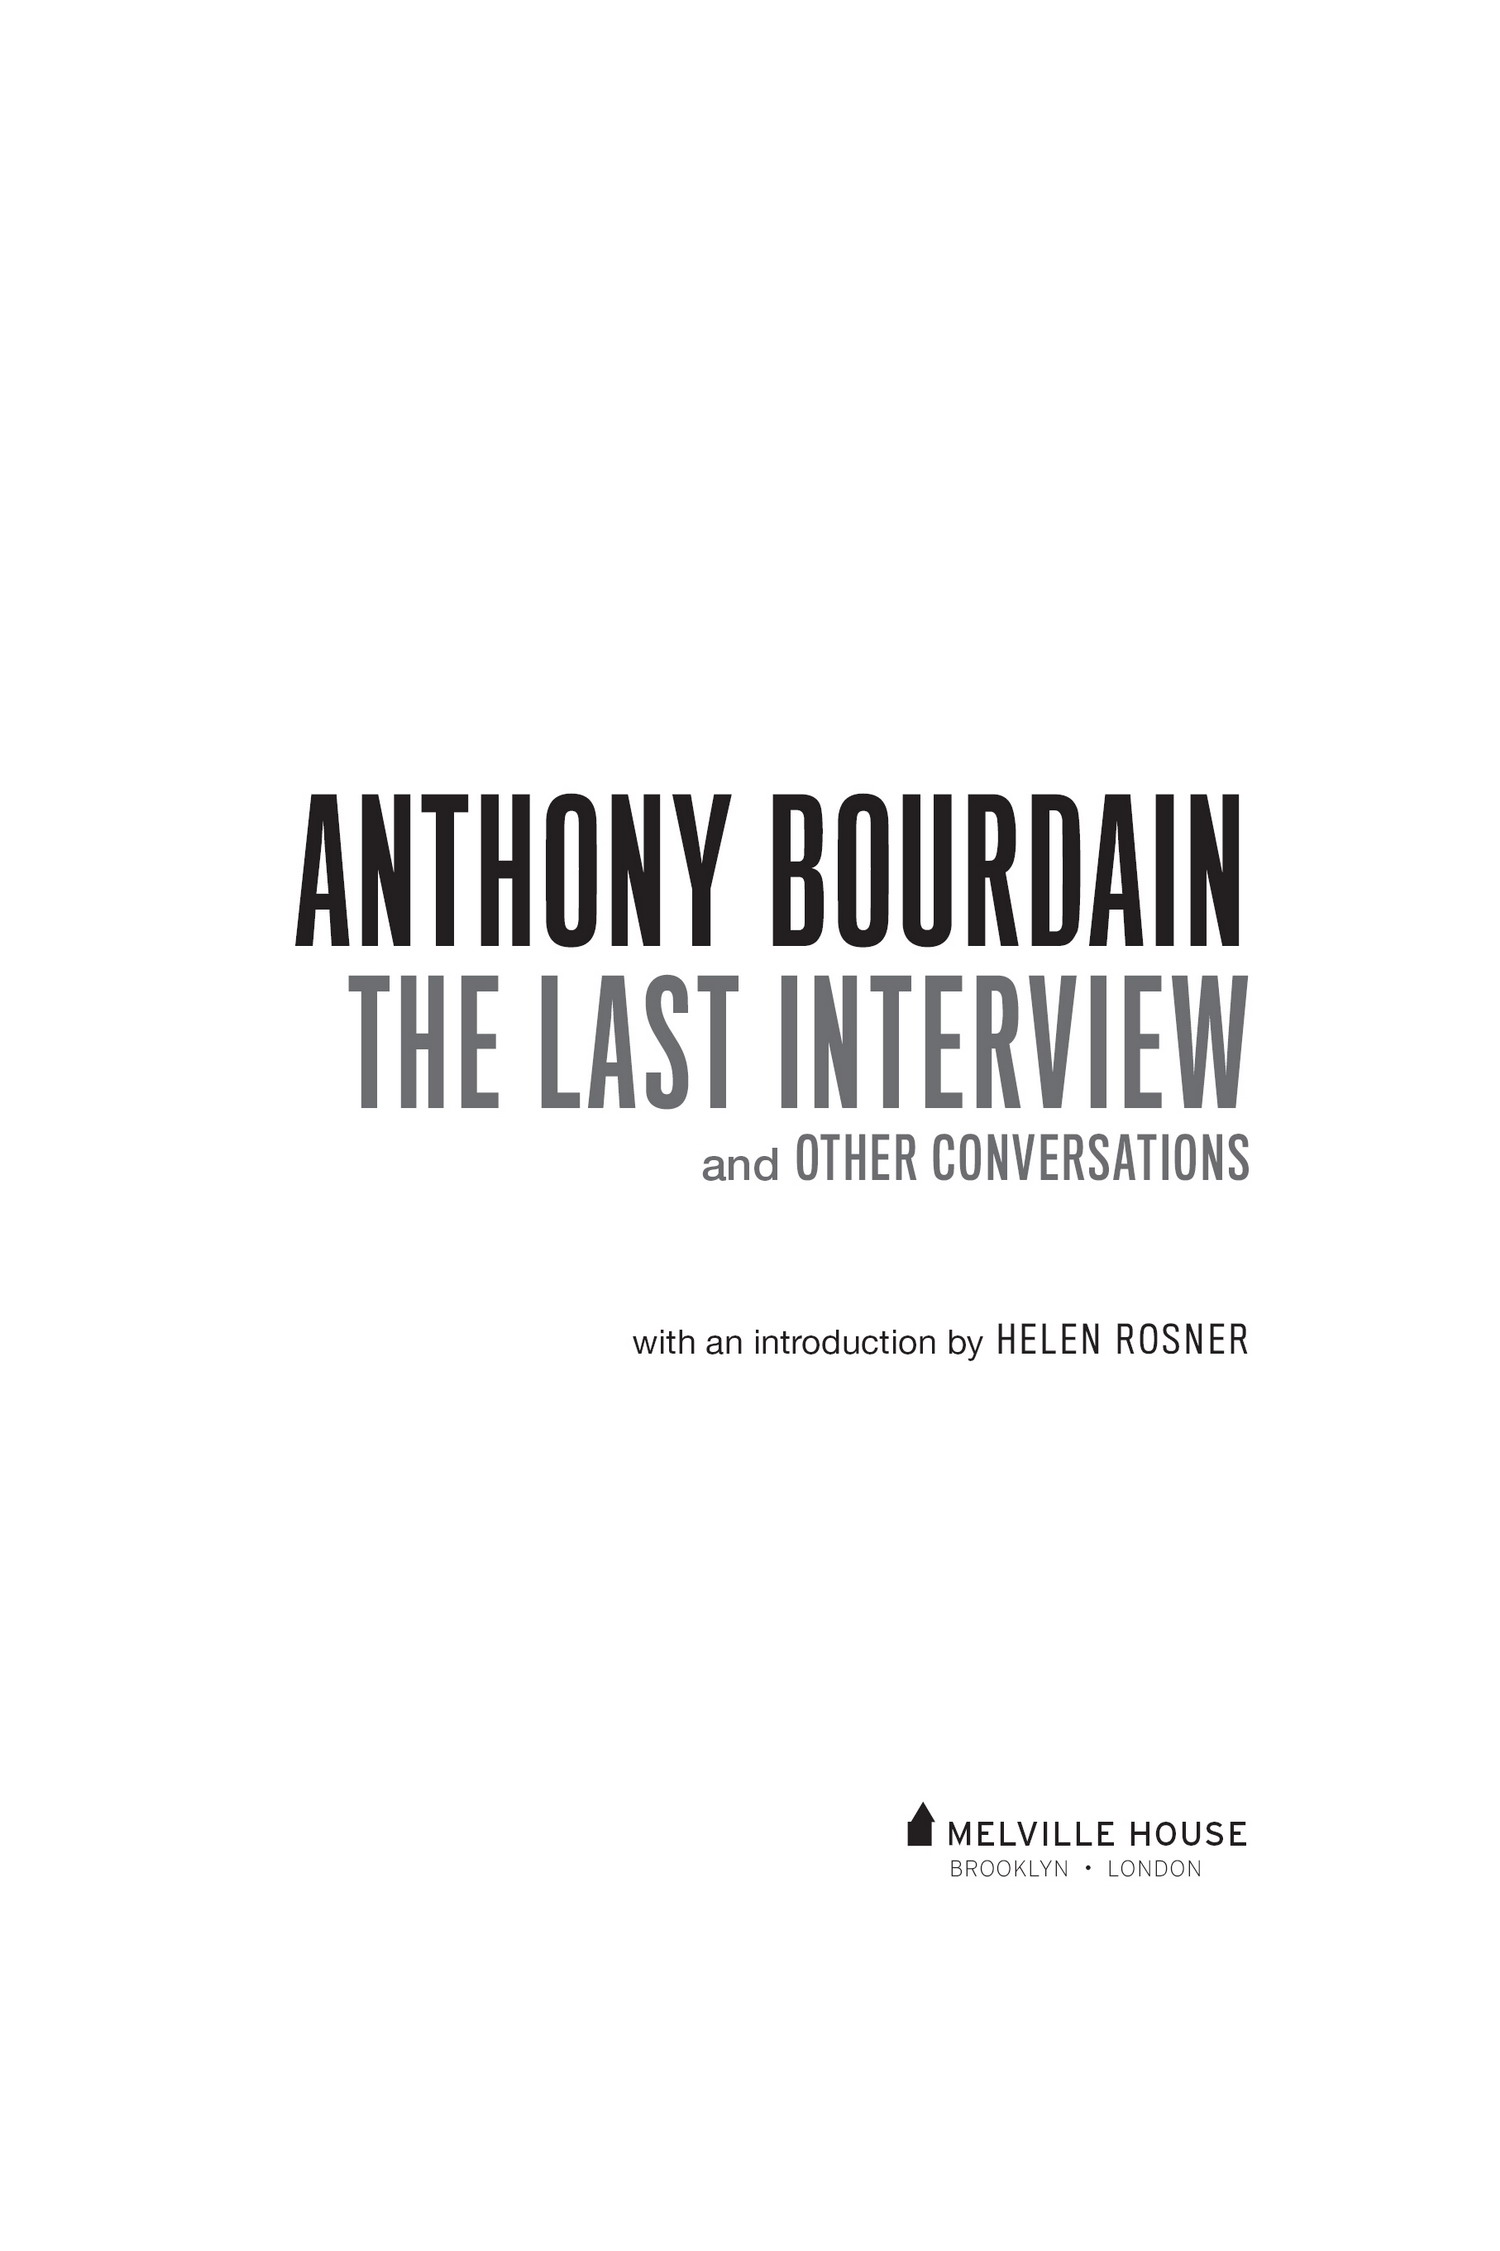 ANTHONY BOURDAIN THE LAST INTERVIEW AND OTHER CONVERSATIONS Copyright 2019 by - photo 2